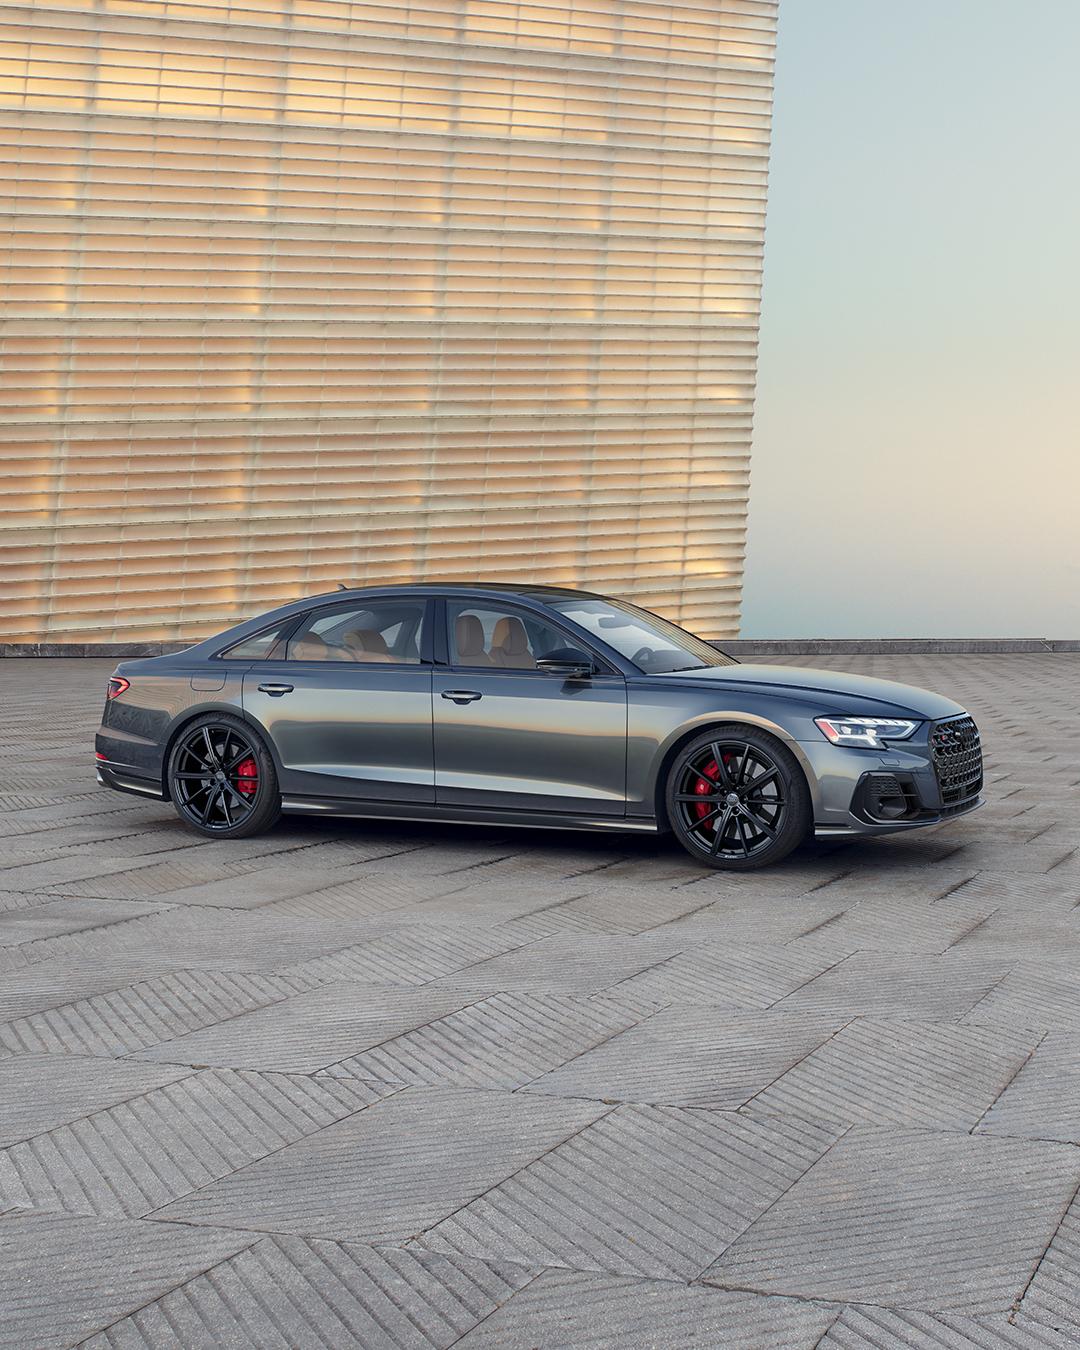 The corner office: available with 563 hp. #AudiS8